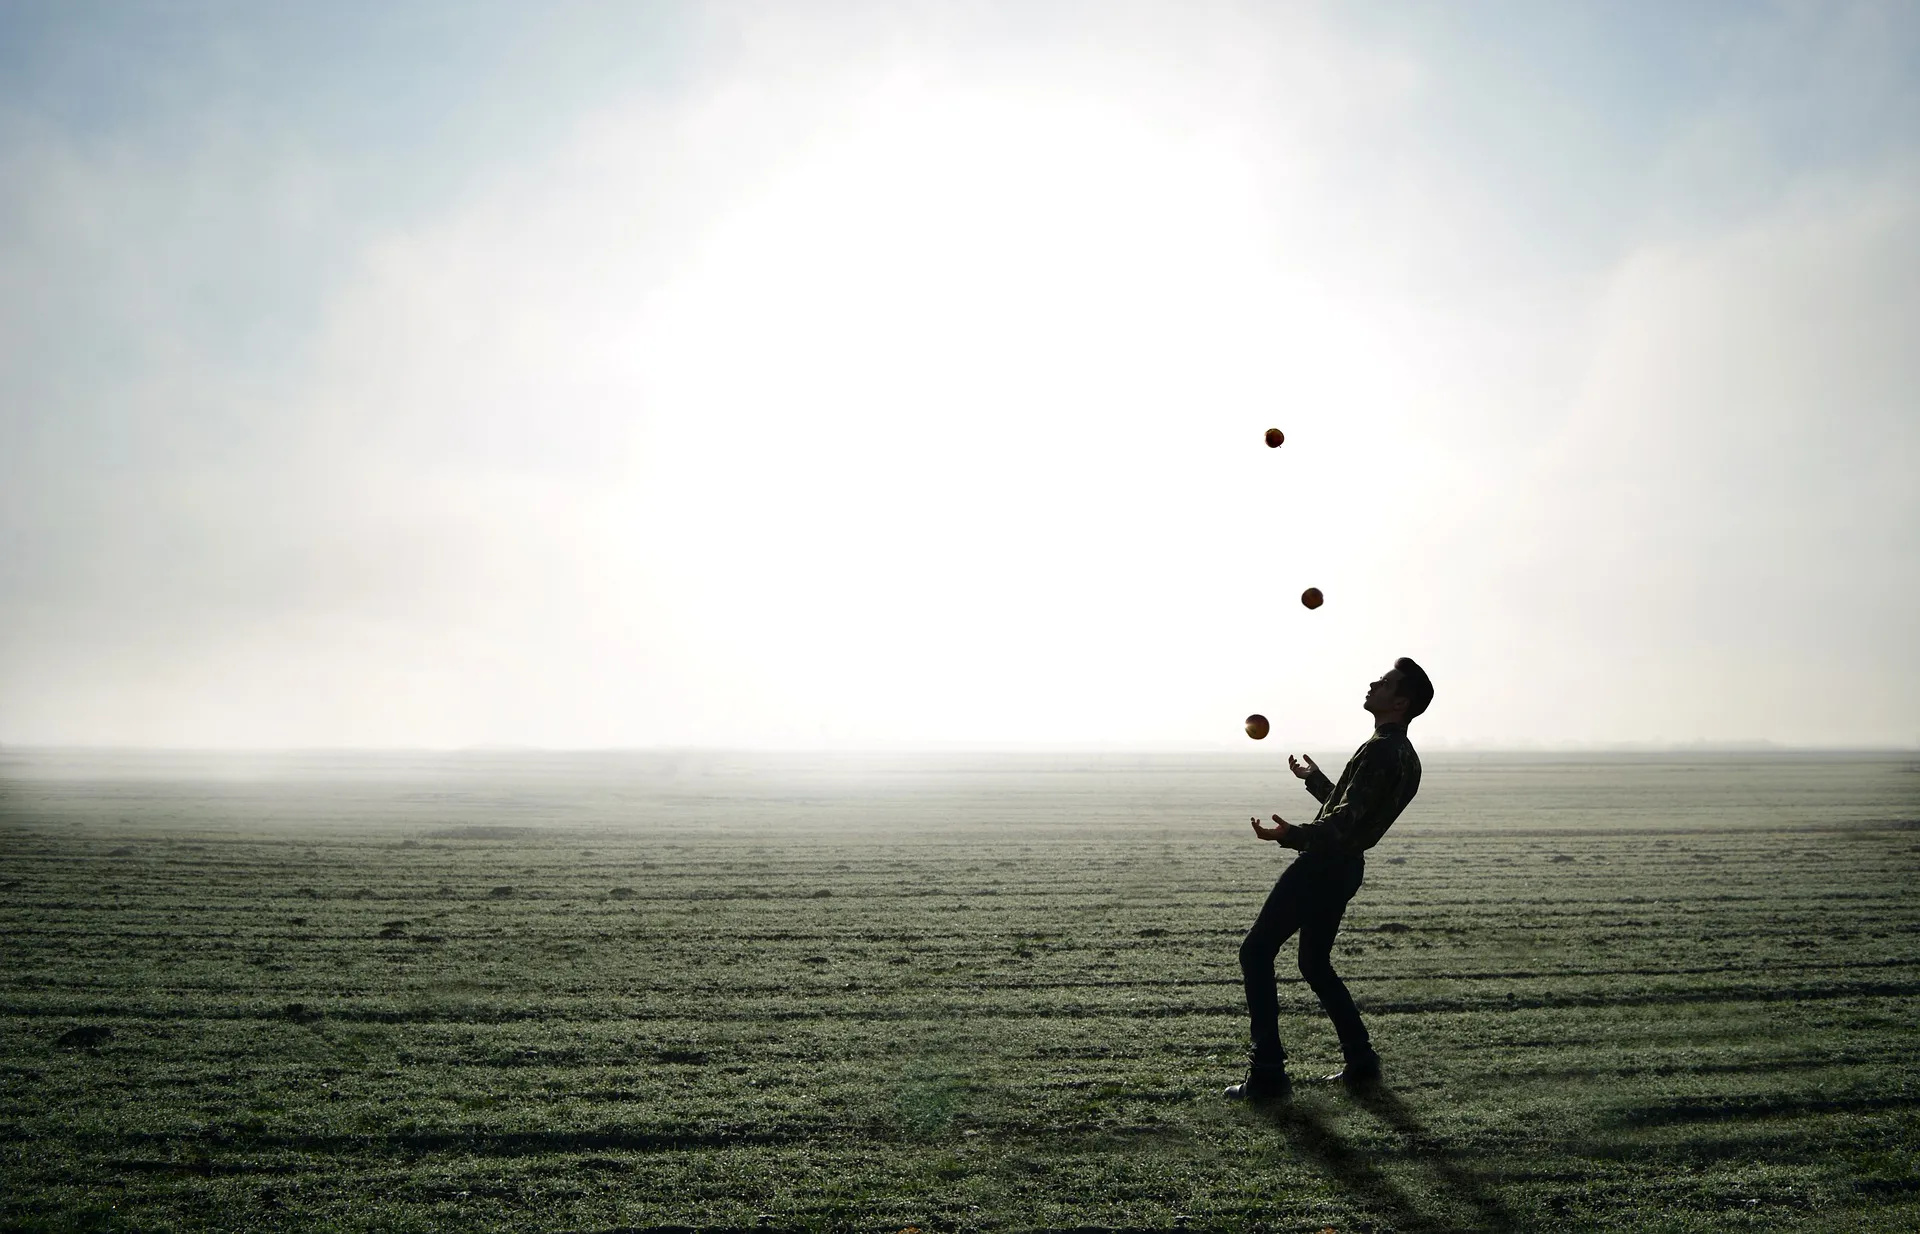 Juggling: An amateur performance, Outdoor recreational activity and a hobby. 1920x1240 HD Wallpaper.